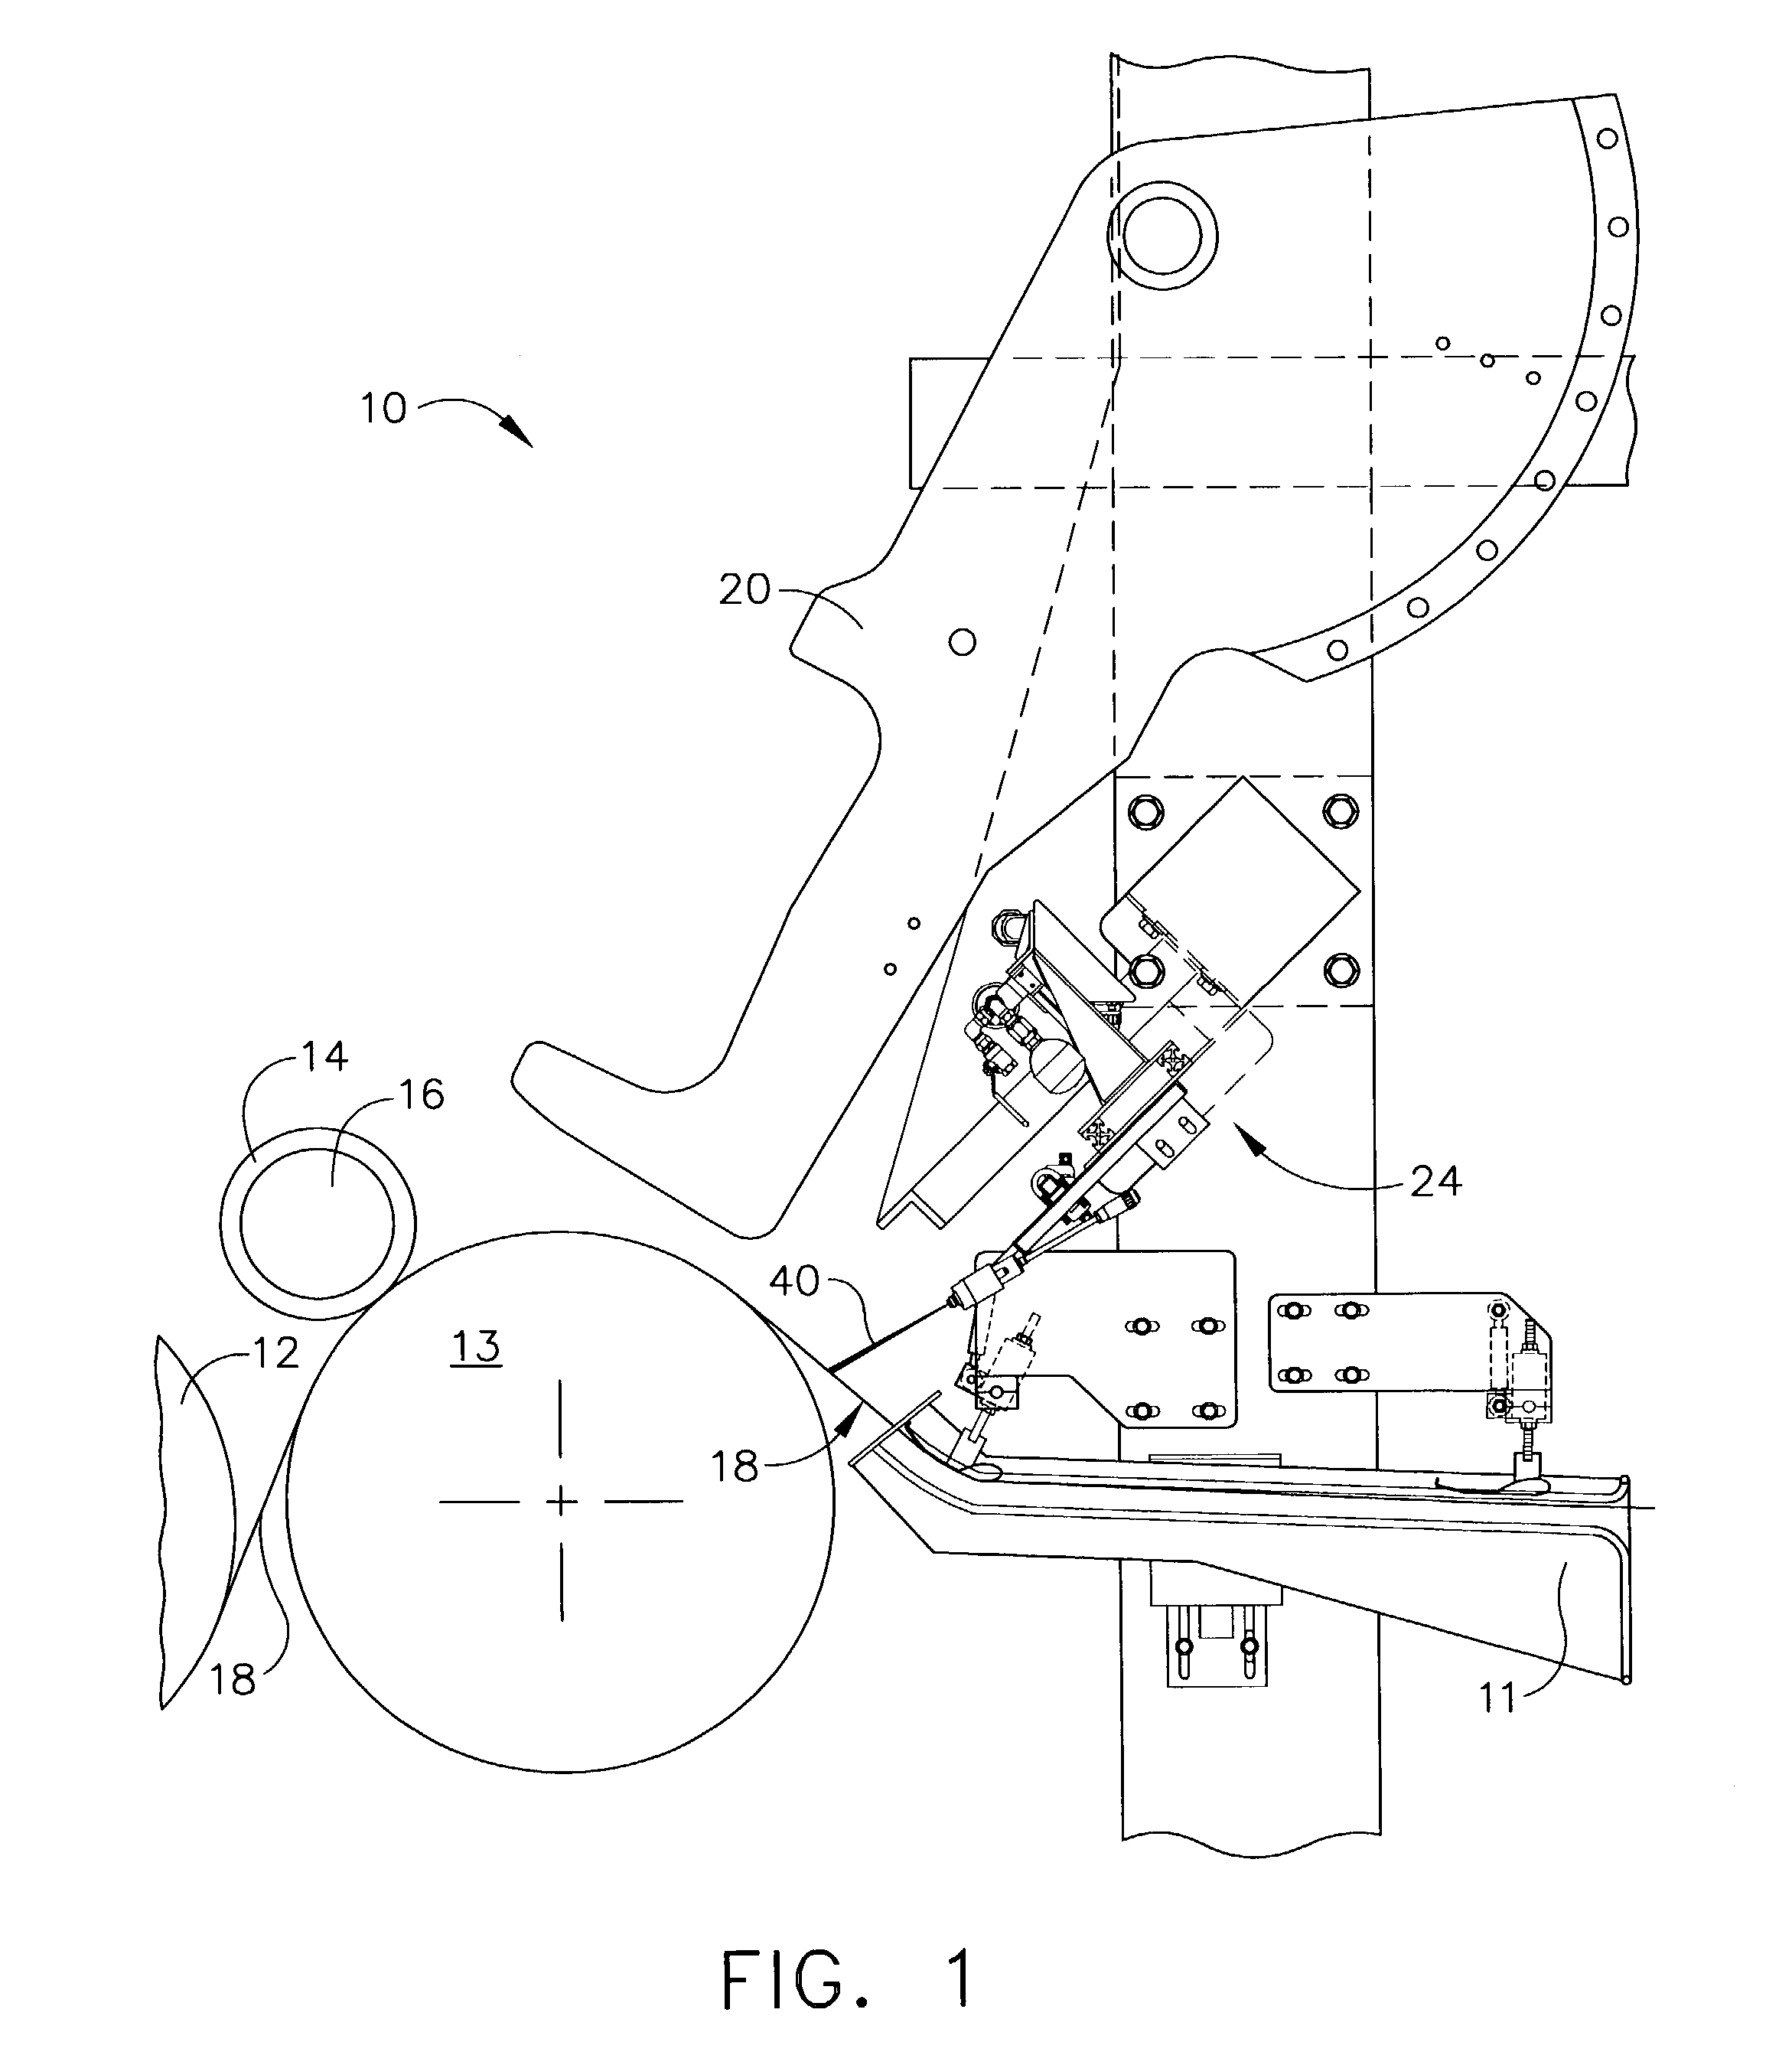 Tissue reel transfer device and method